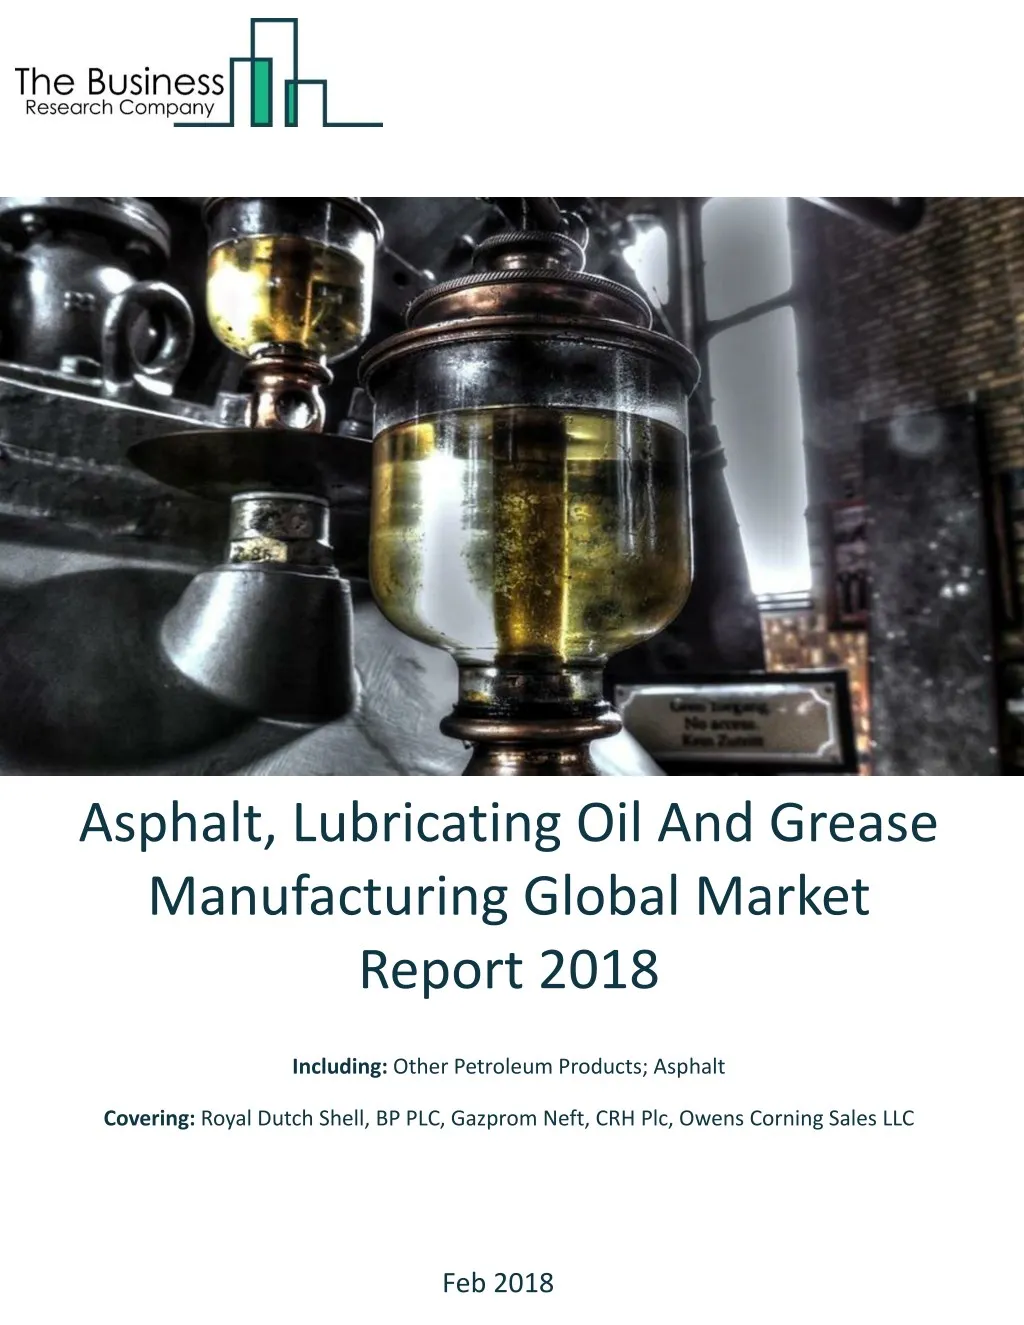 asphalt lubricating oil and grease manufacturing